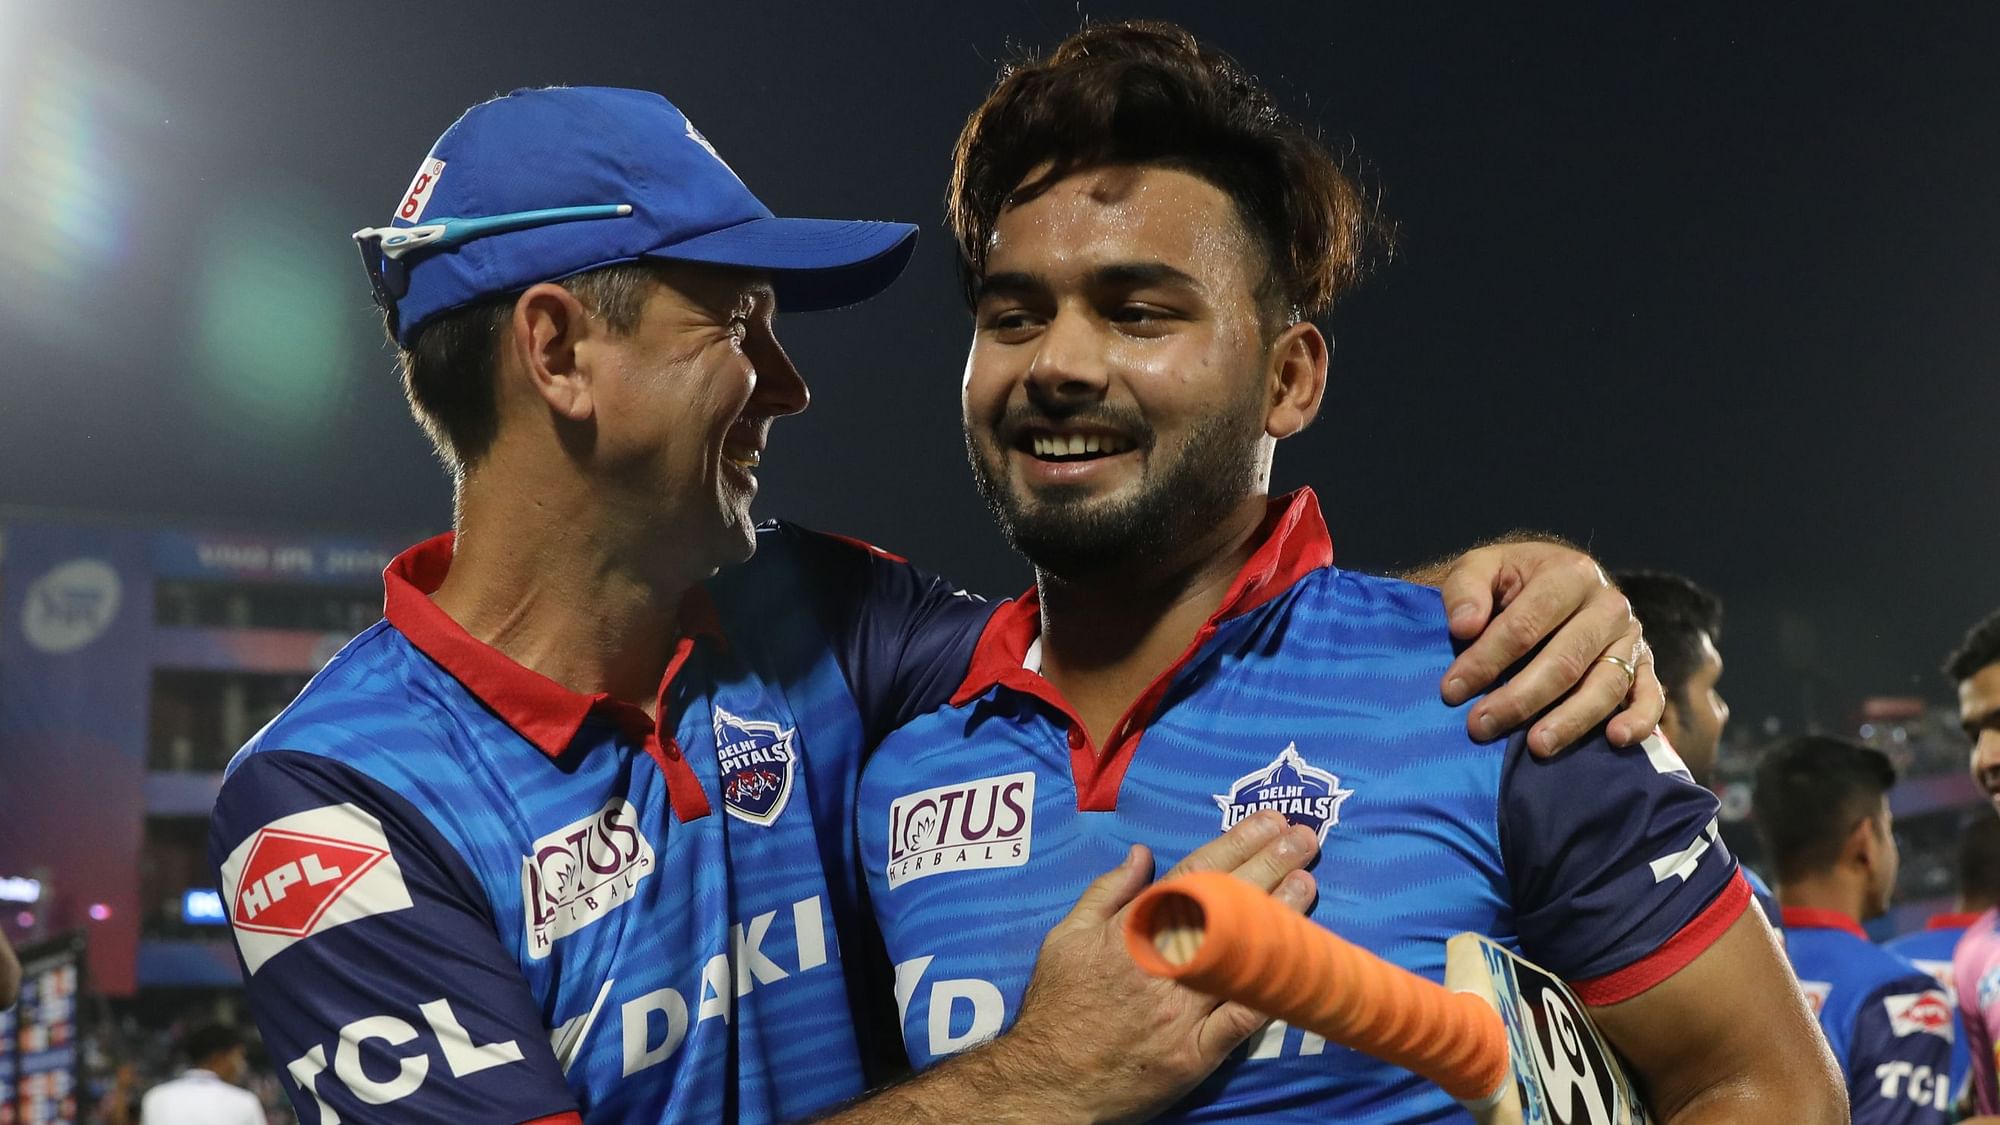 With Shreyas Iyer ruled out due to a shoulder injury, Delhi Capitals have named Rishabh Pant the captain for IPL 2021.